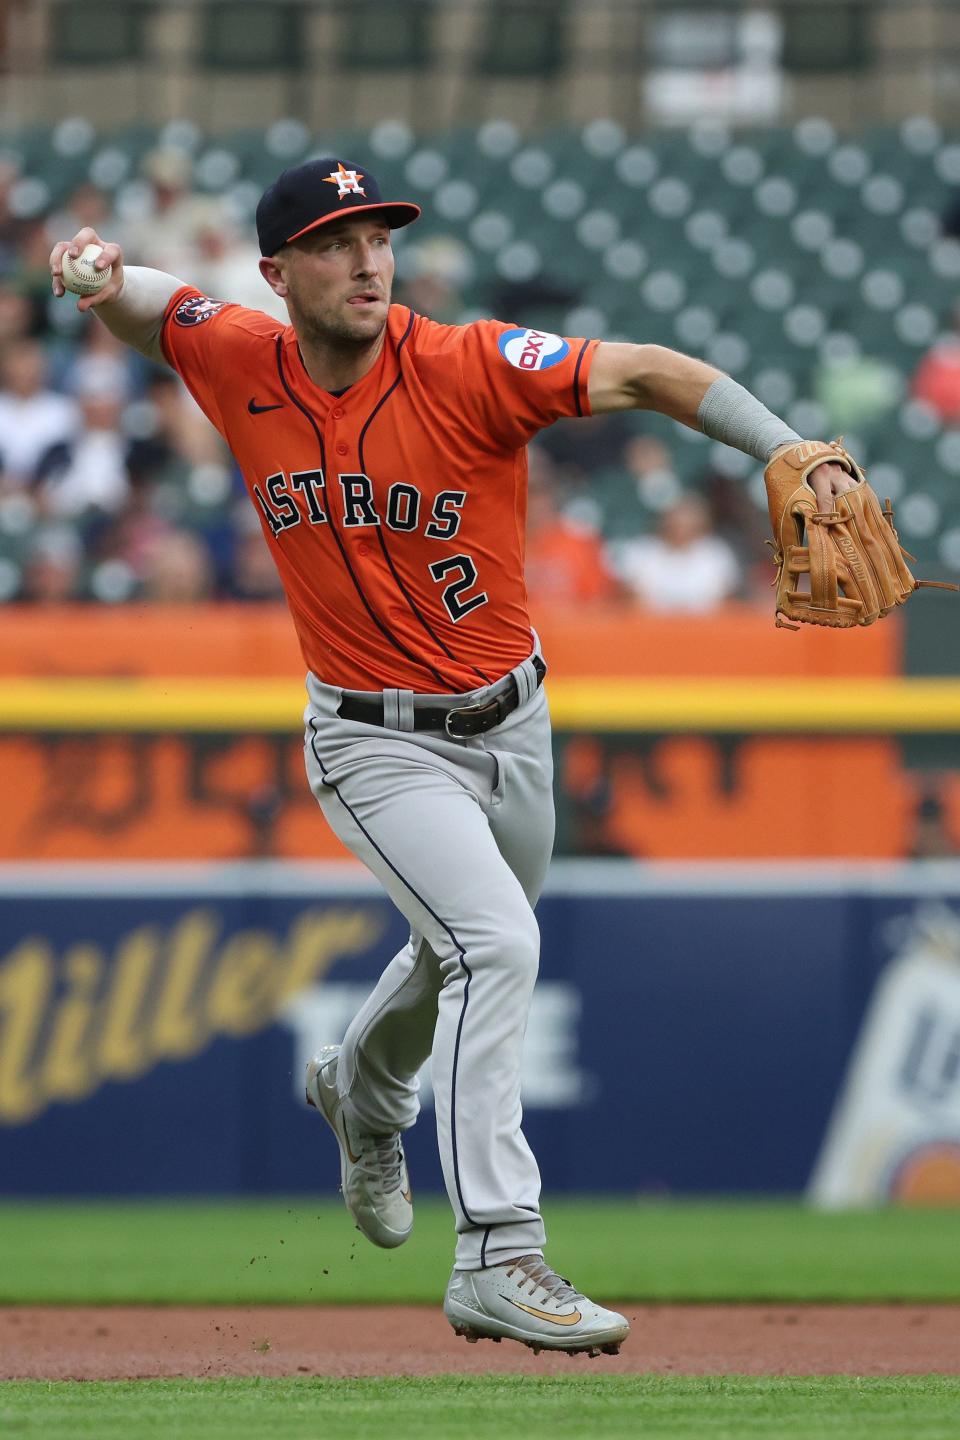 Houston Astros third baseman Alex Bregman makes a throw to first base in the first inning vs. the Detroit Tigers at Comerica Park on August 25, 2023.